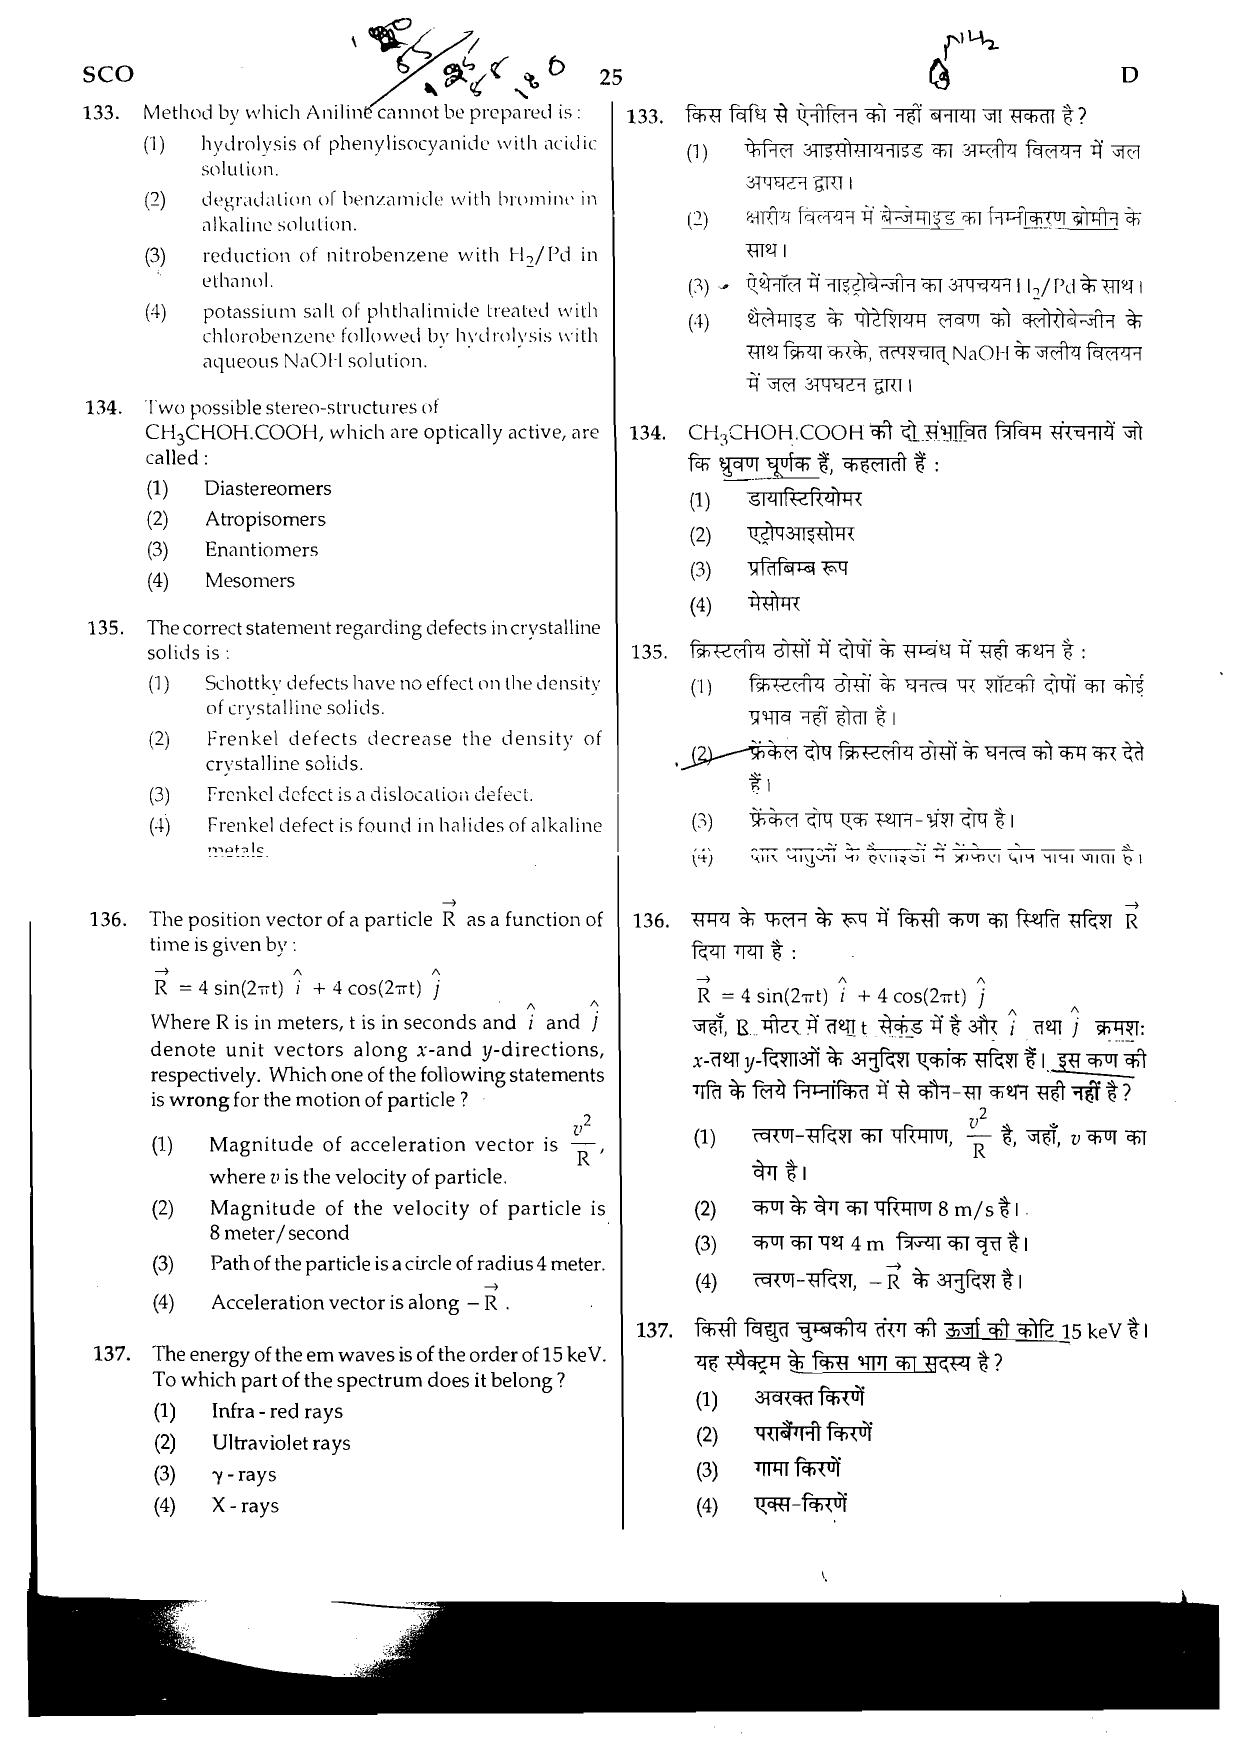 NEET Code D 2015 Question Paper - Page 25